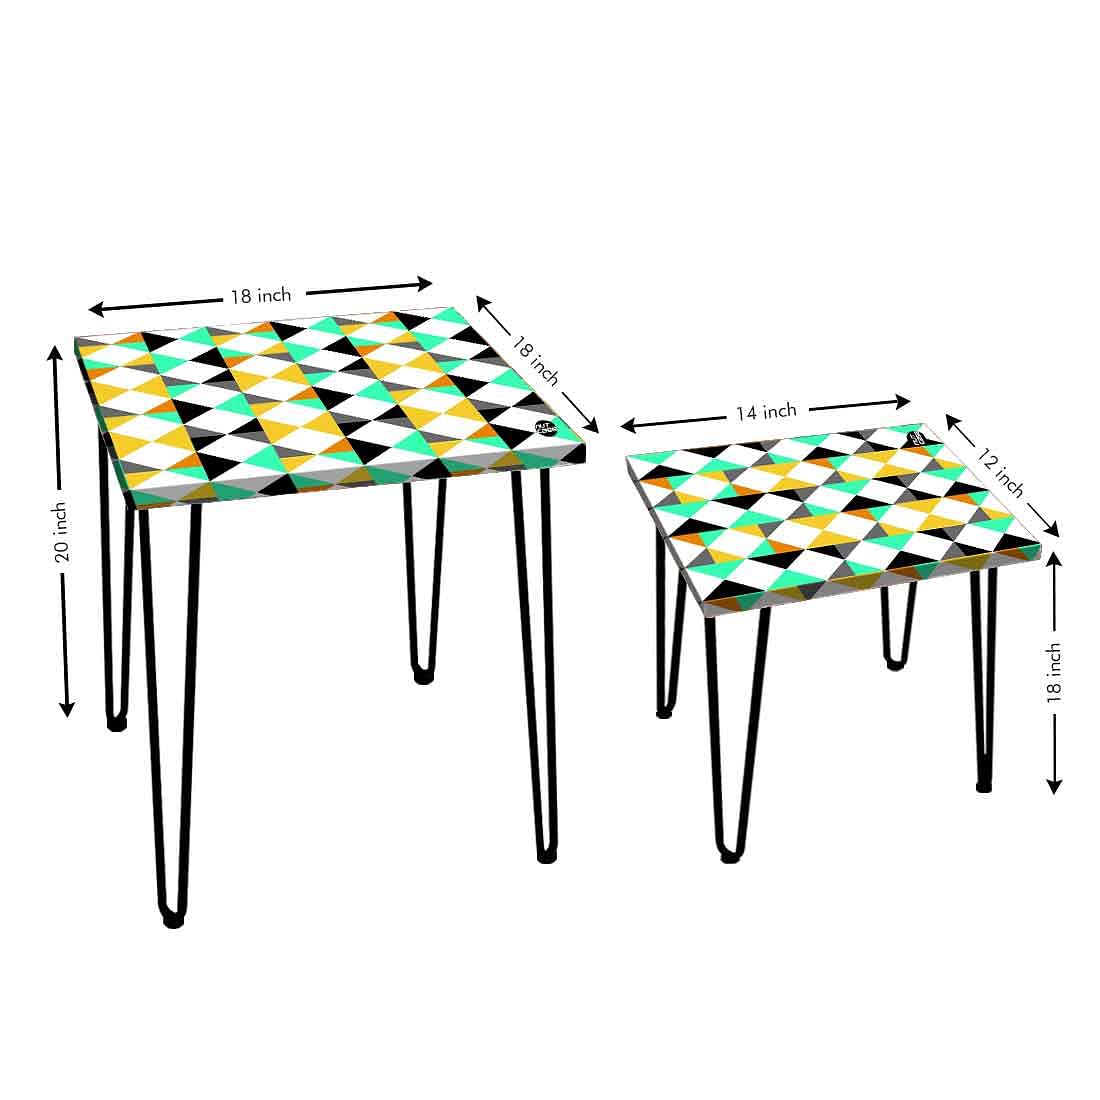 Designer Nesting Tables for Home & Office Set of 2 - Colorful Diamond Nutcase